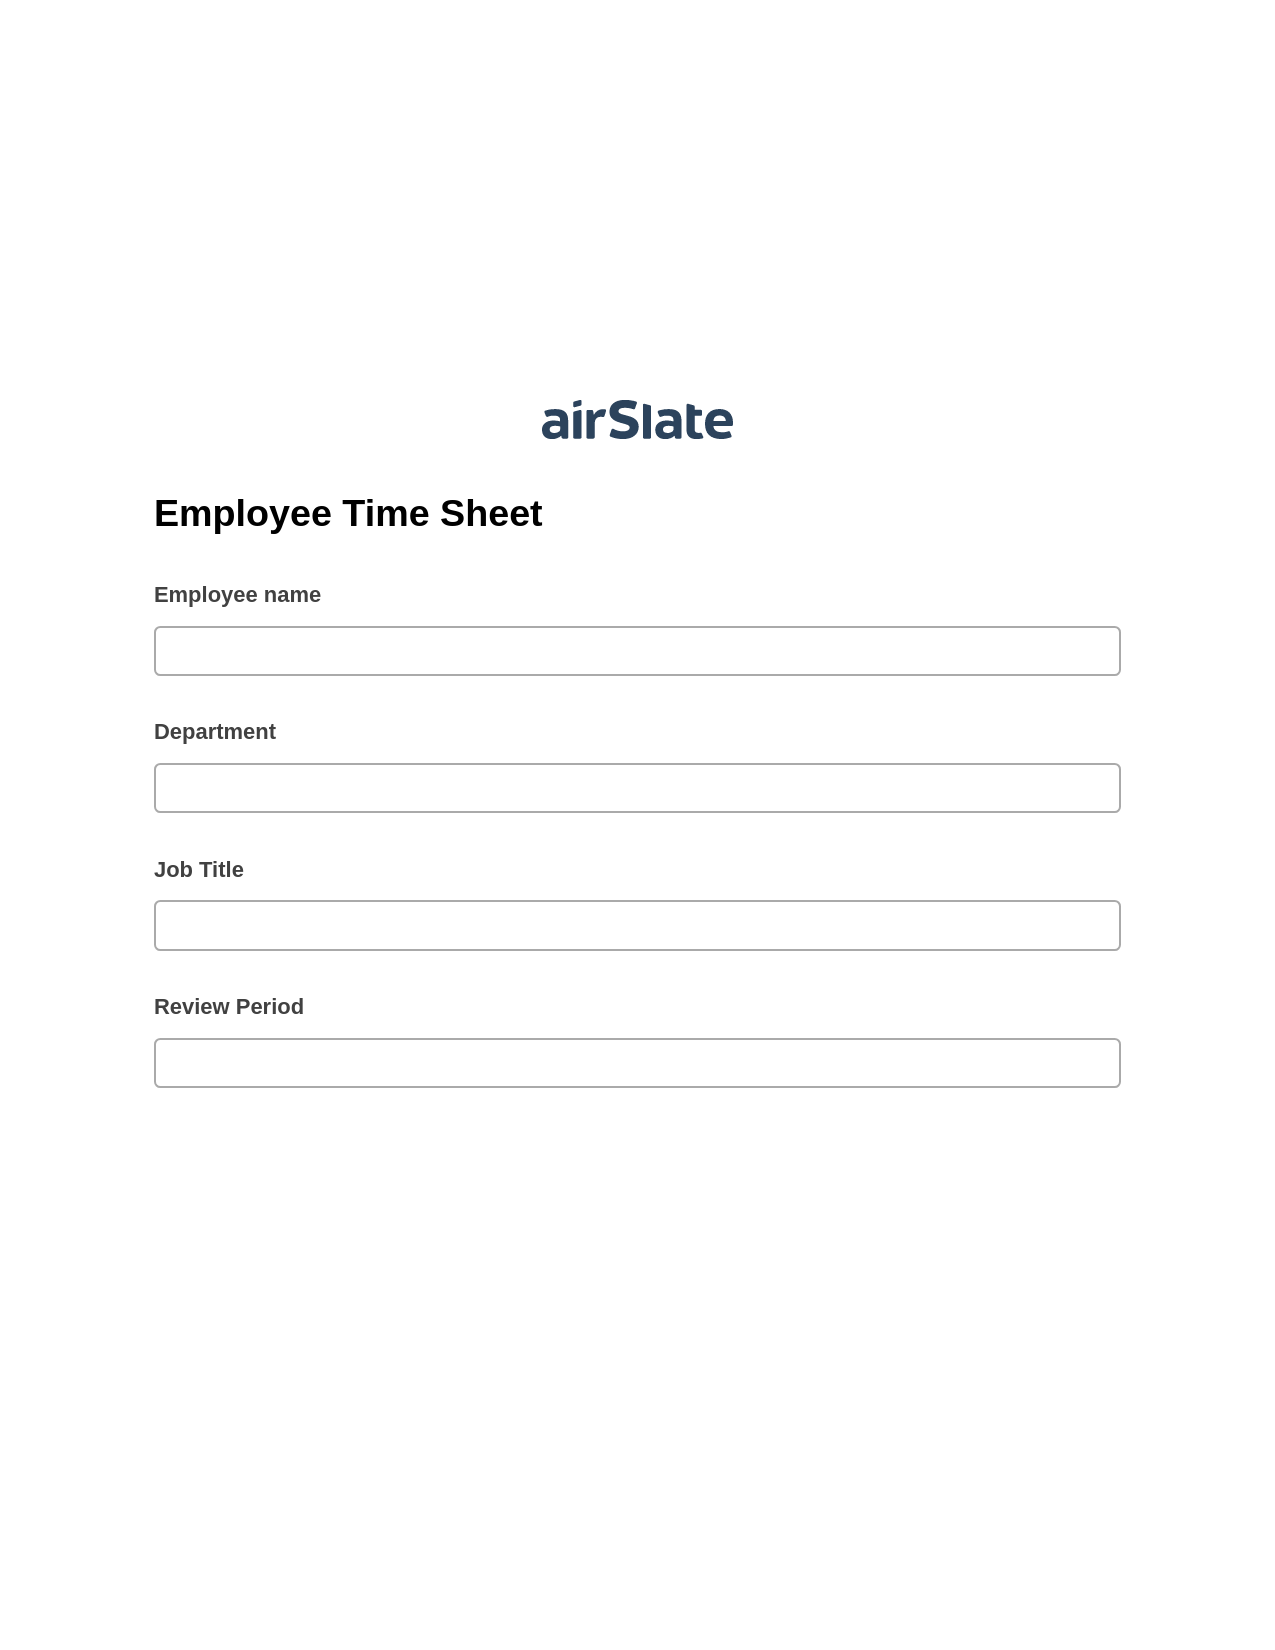 Employee Time Sheet Pre-fill from Excel Spreadsheet Bot, Send Mailchimp Campaign Bot, Slack Notification Postfinish Bot